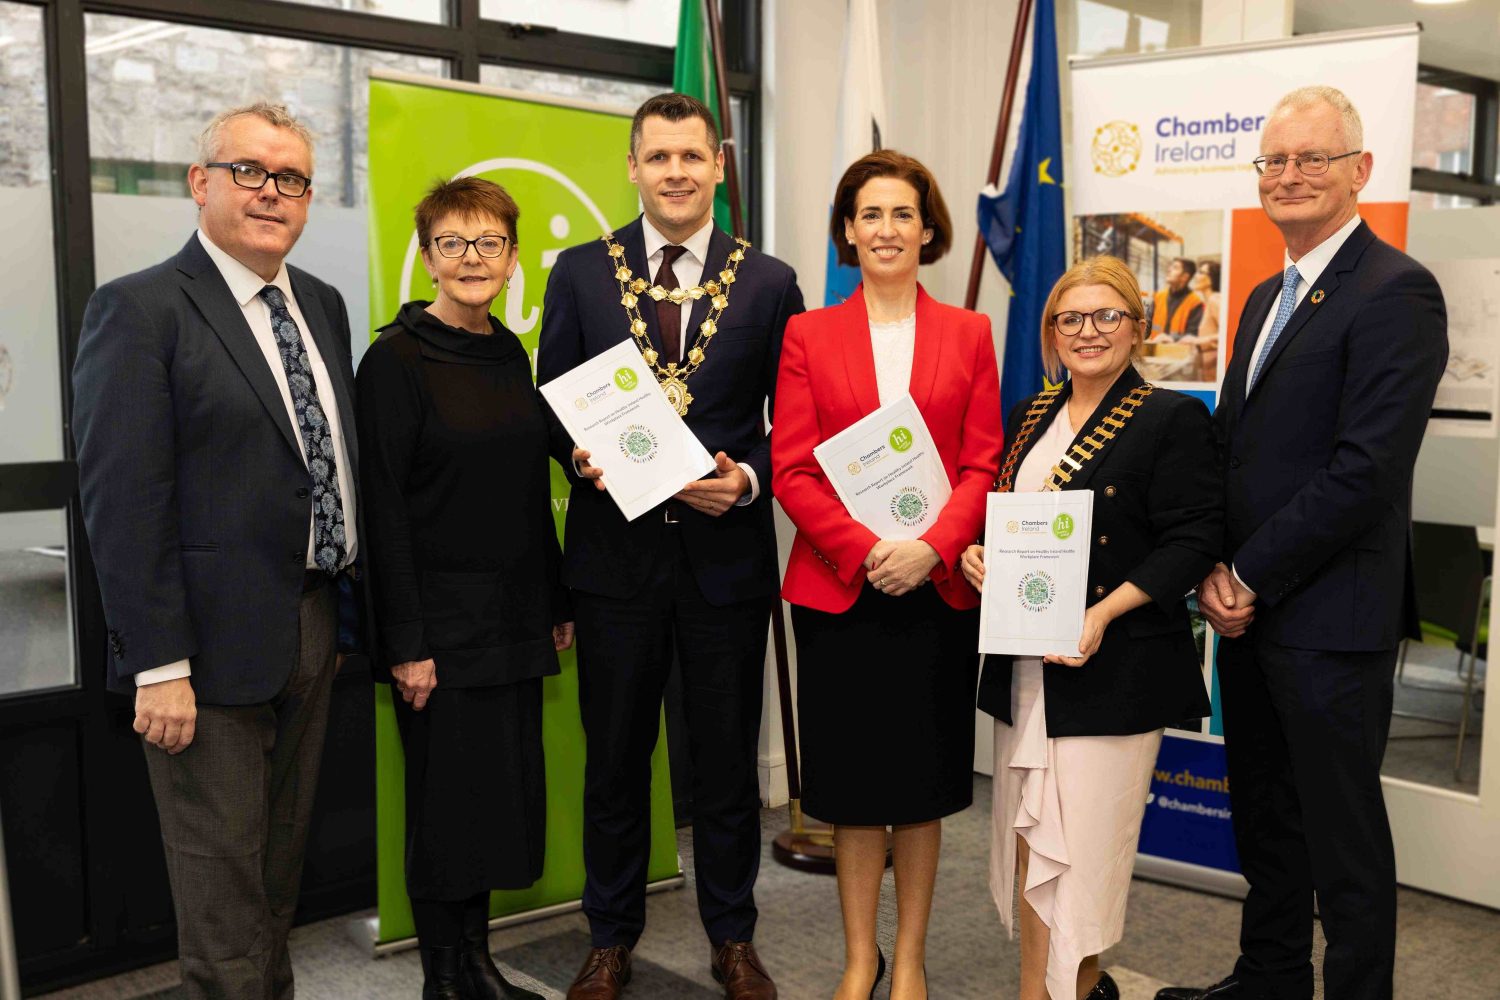 CHAMBERS IRELAND REPORT ON HEALTHY WORKPLACE RESEARCH LAUNCHED